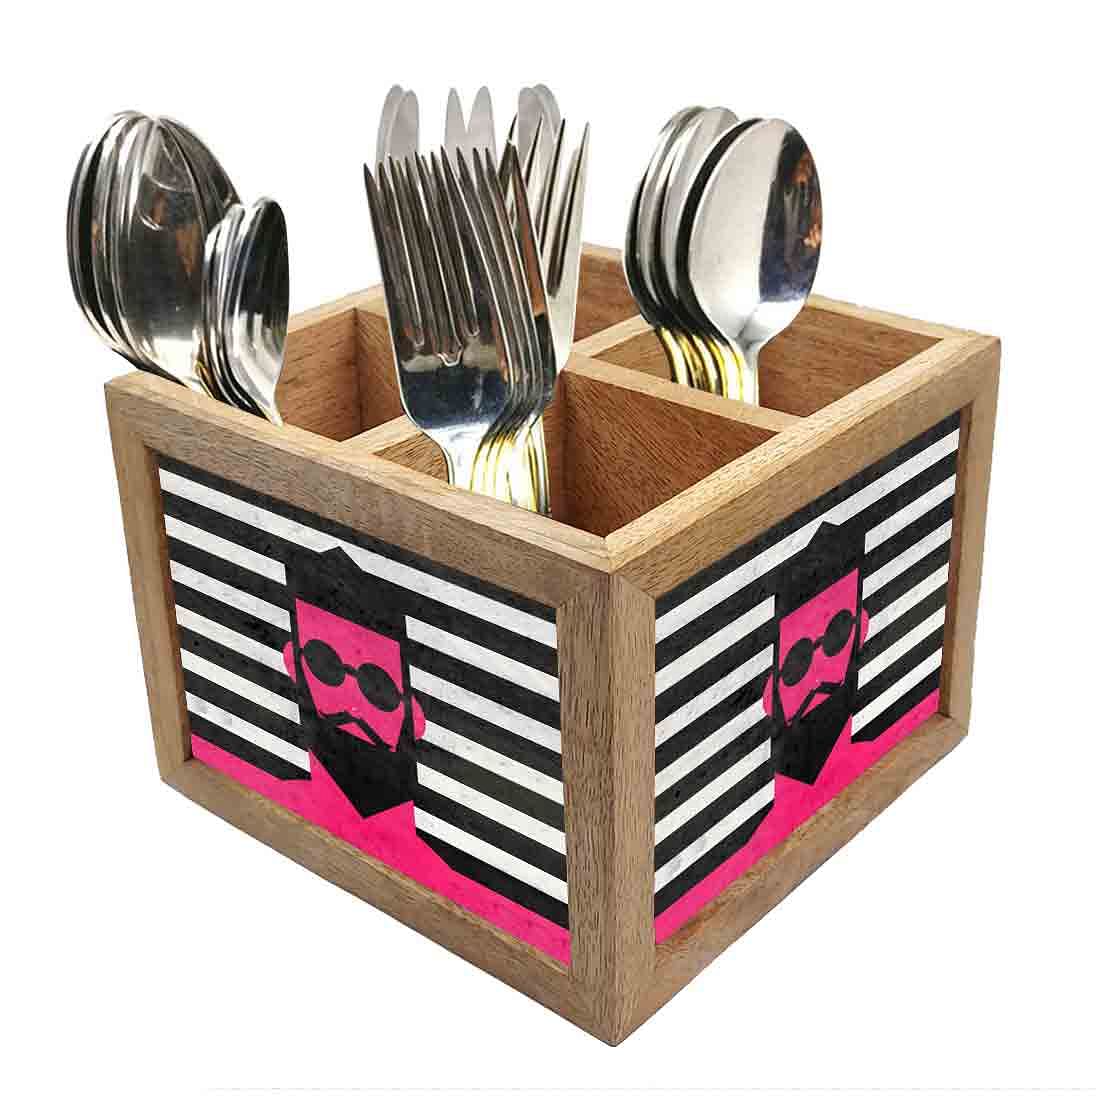 Dude Cutlery Holder Stand Silverware Caddy Organizer for Spoons, Forks & Knives-Made of Pinewood Nutcase